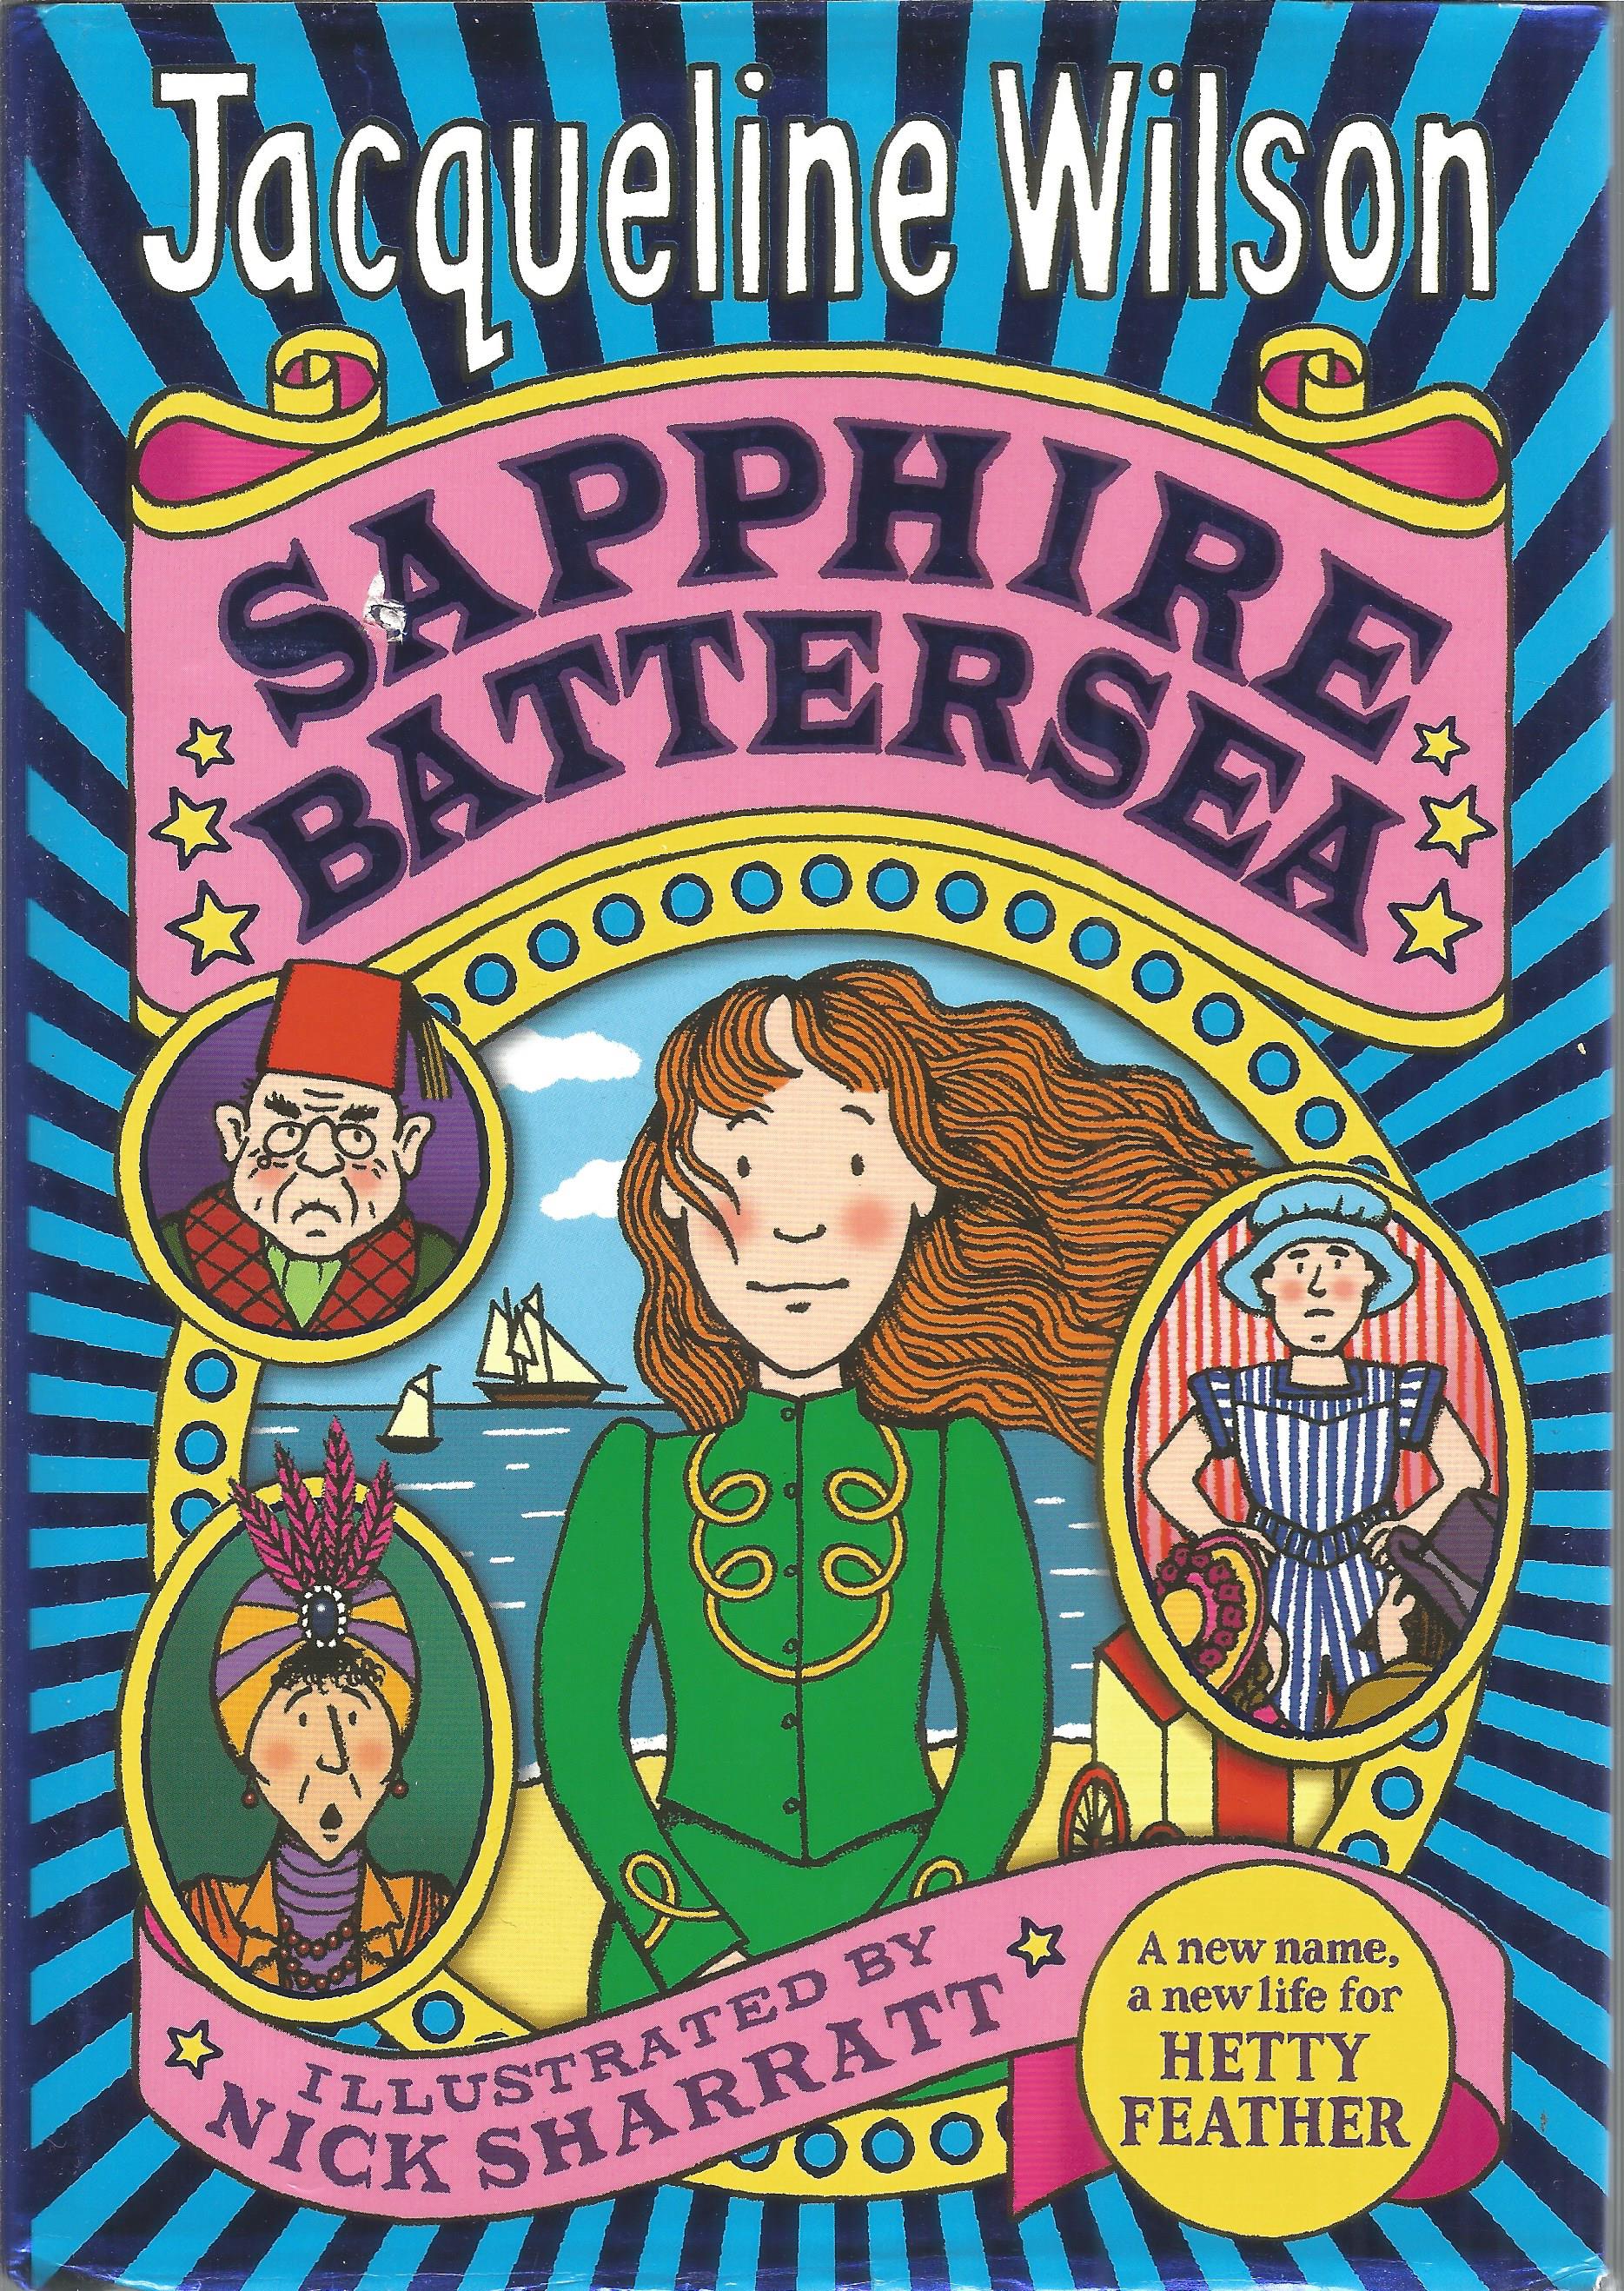 Sapphire Battersea by Jacqueline Wilson. Signed dedicated hardback book with dust jacket published